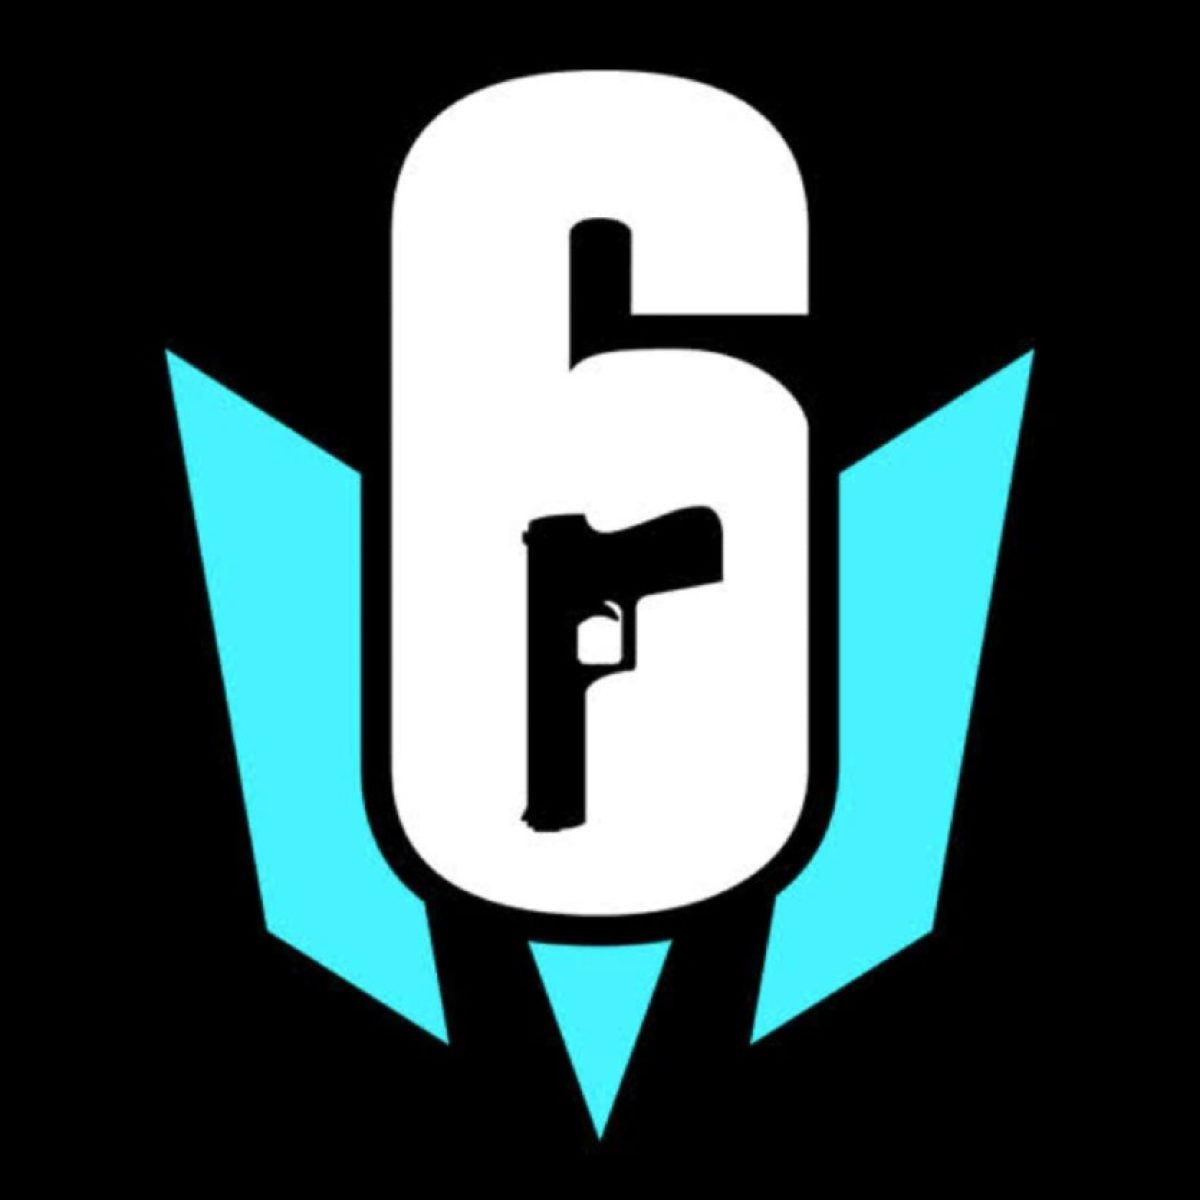 Ubisoft announces Rainbow Six Mobile with first gameplay video